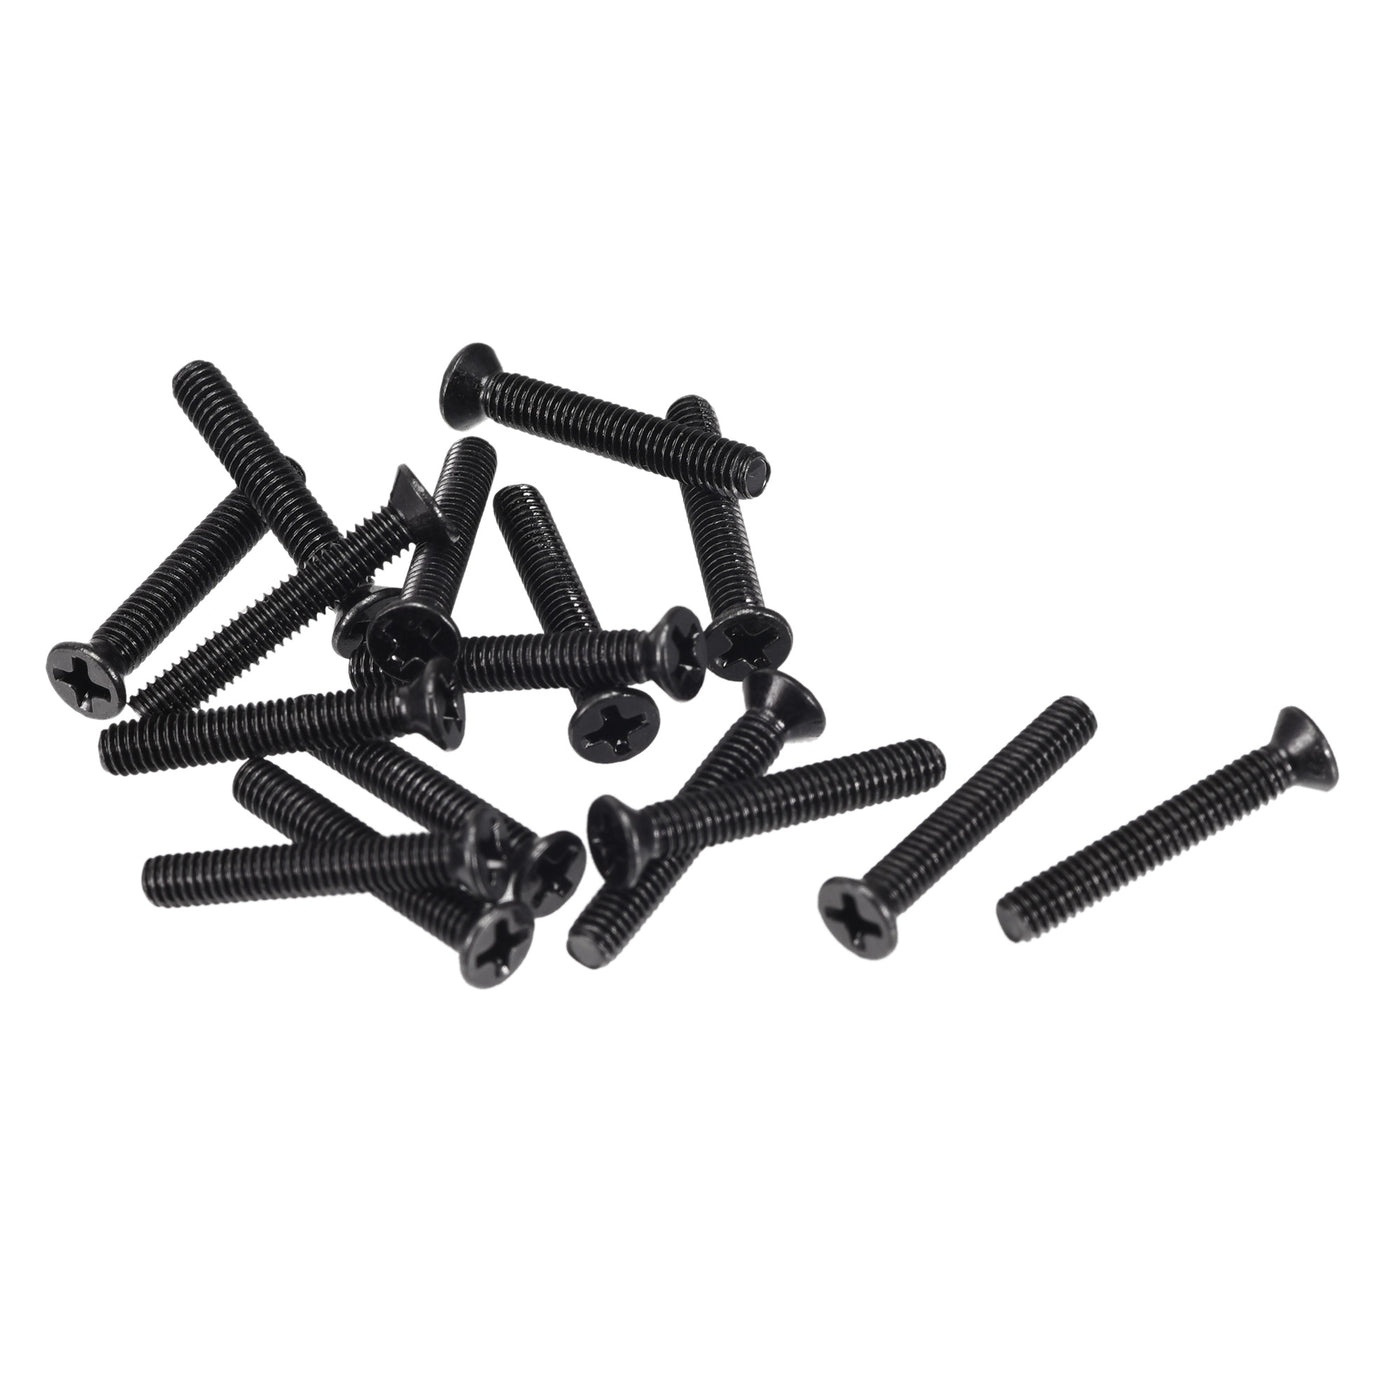 uxcell Uxcell M2.5 x 16mm Phillips Flat Head Screws Carbon Steel Machine Screws Black for Home Office Computer Case Appliance Equipment 350pcs